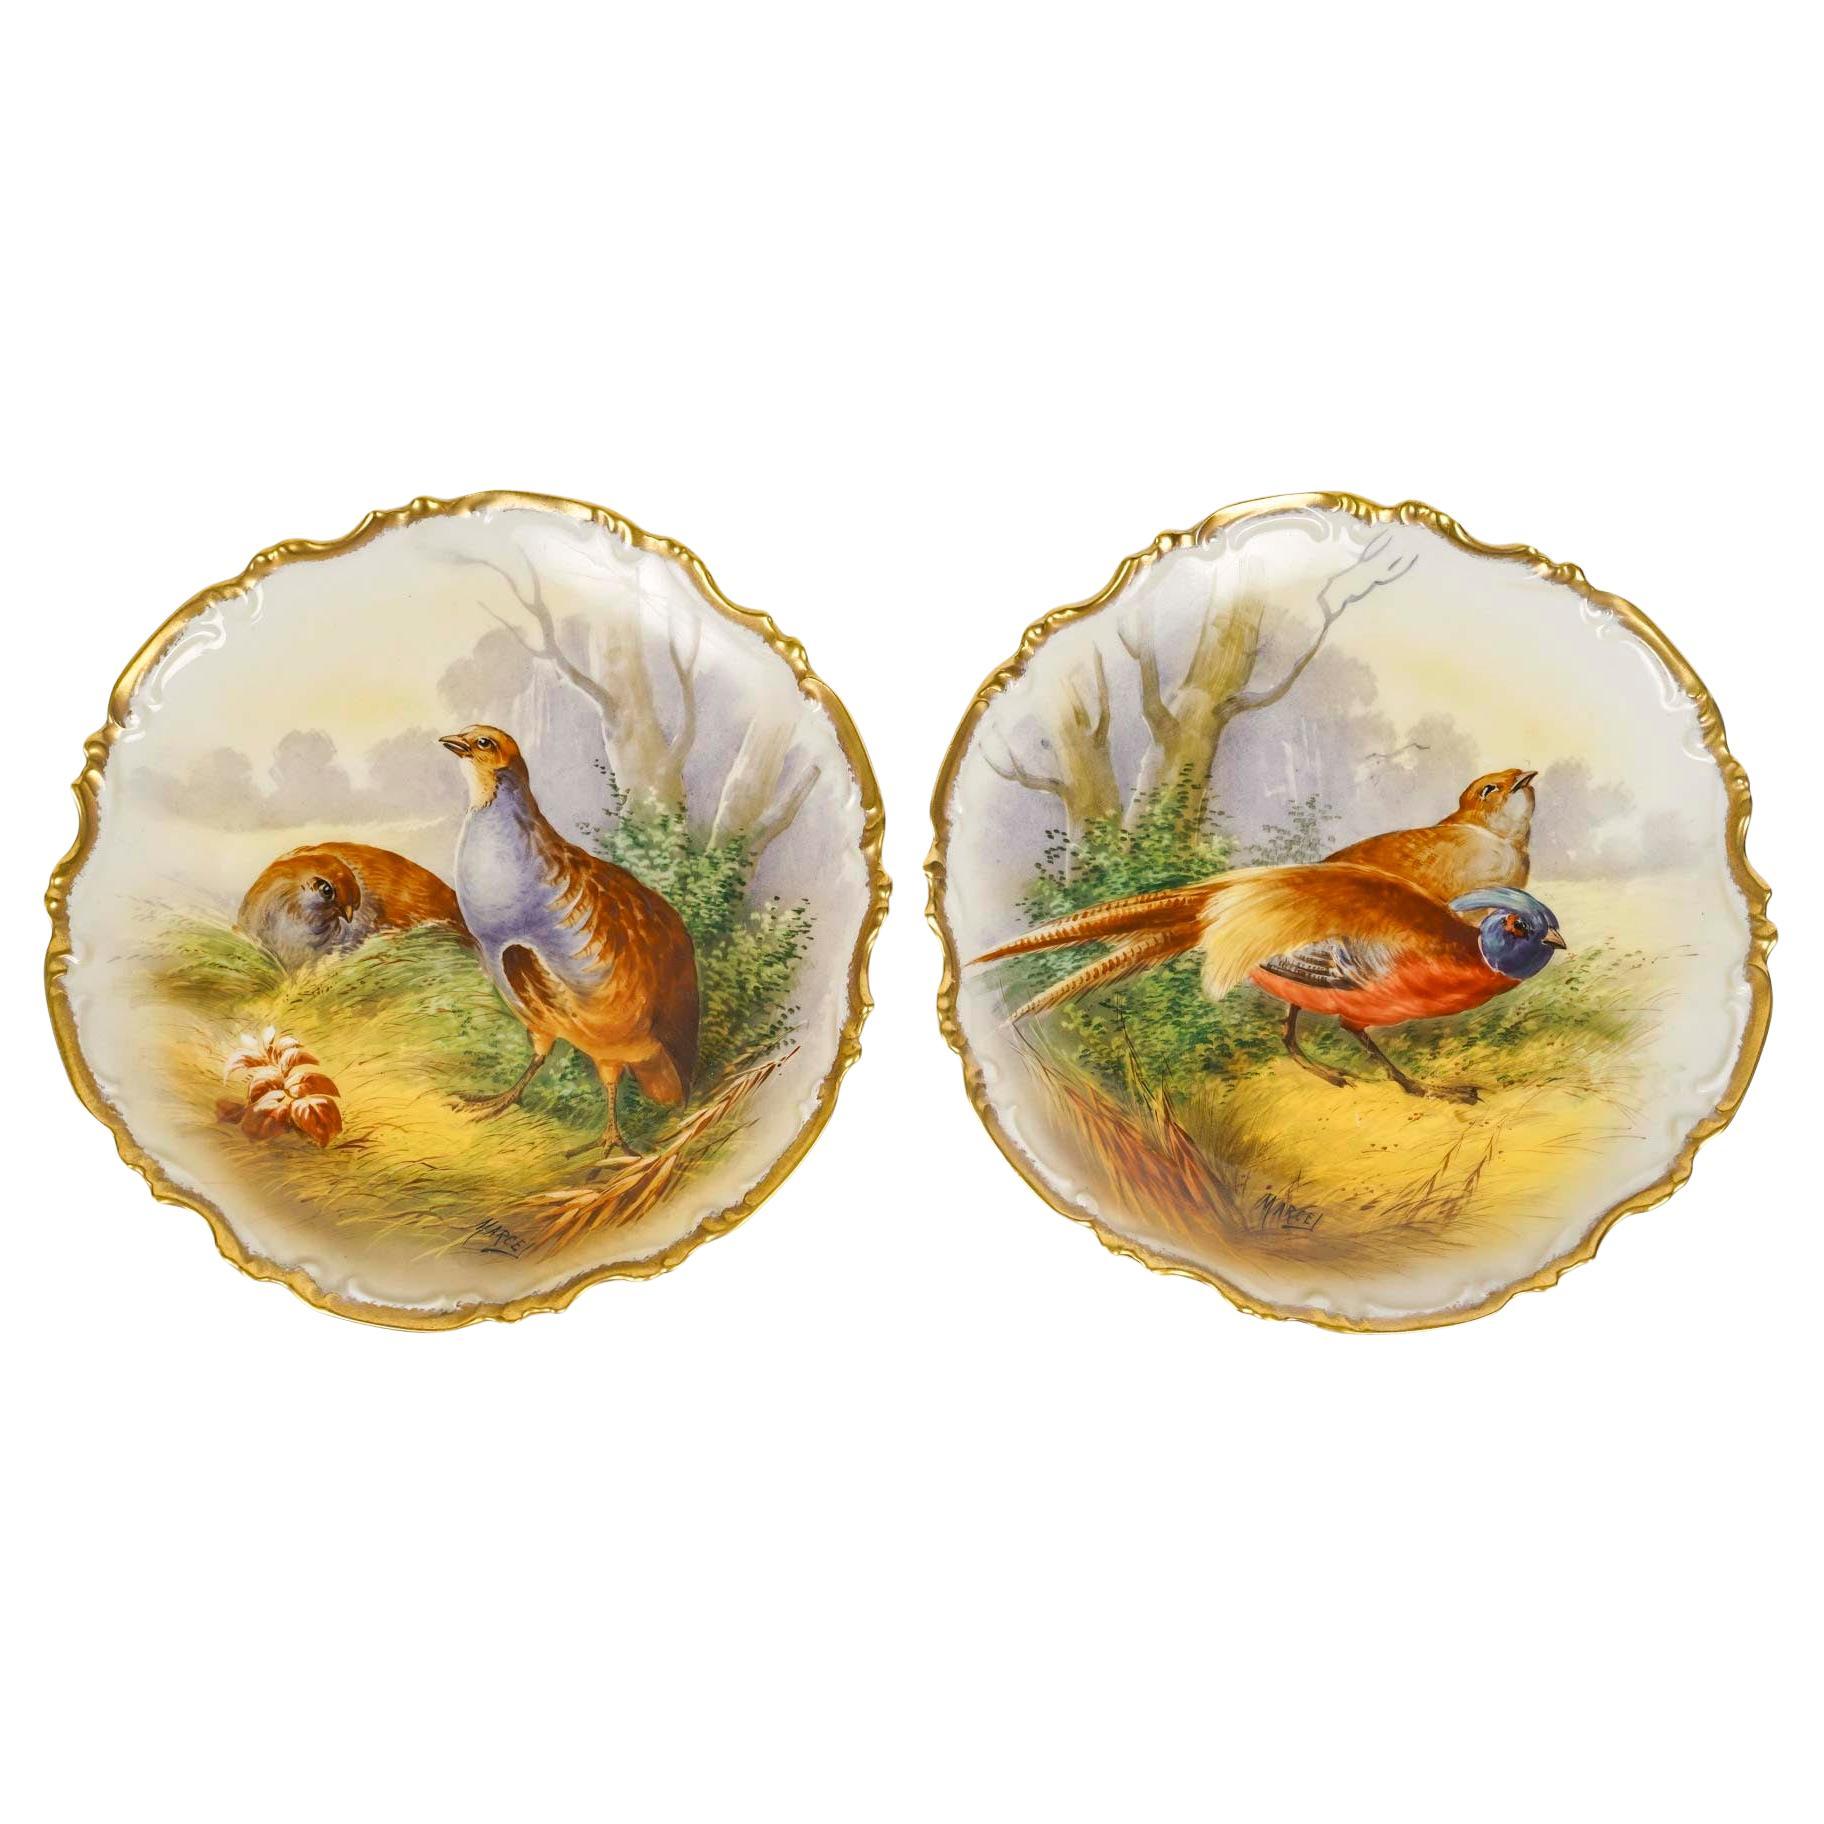 Pair of Decorative Dishes, Manufacture of Porcelain of Limoges. For Sale